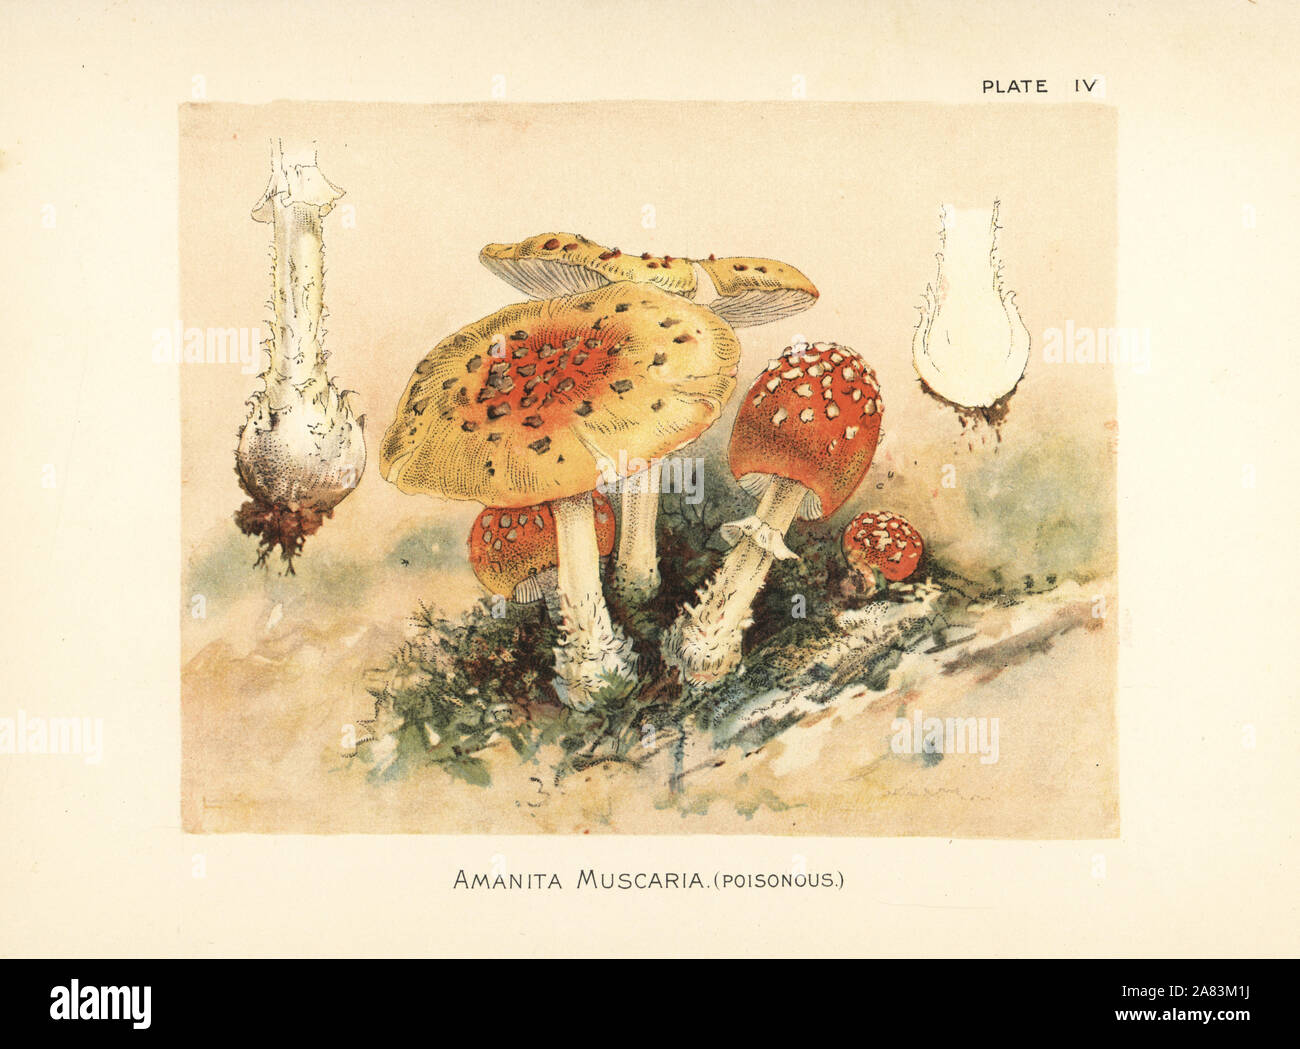 Fly agaric, Amanita muscaria. Poisonous mushroom and psychoactive fungi. Chromolithograph after a botanical illustration by William Hamilton Gibson from his book Our Edible Toadstools and Mushrooms, Harper, New York, 1895. Stock Photo